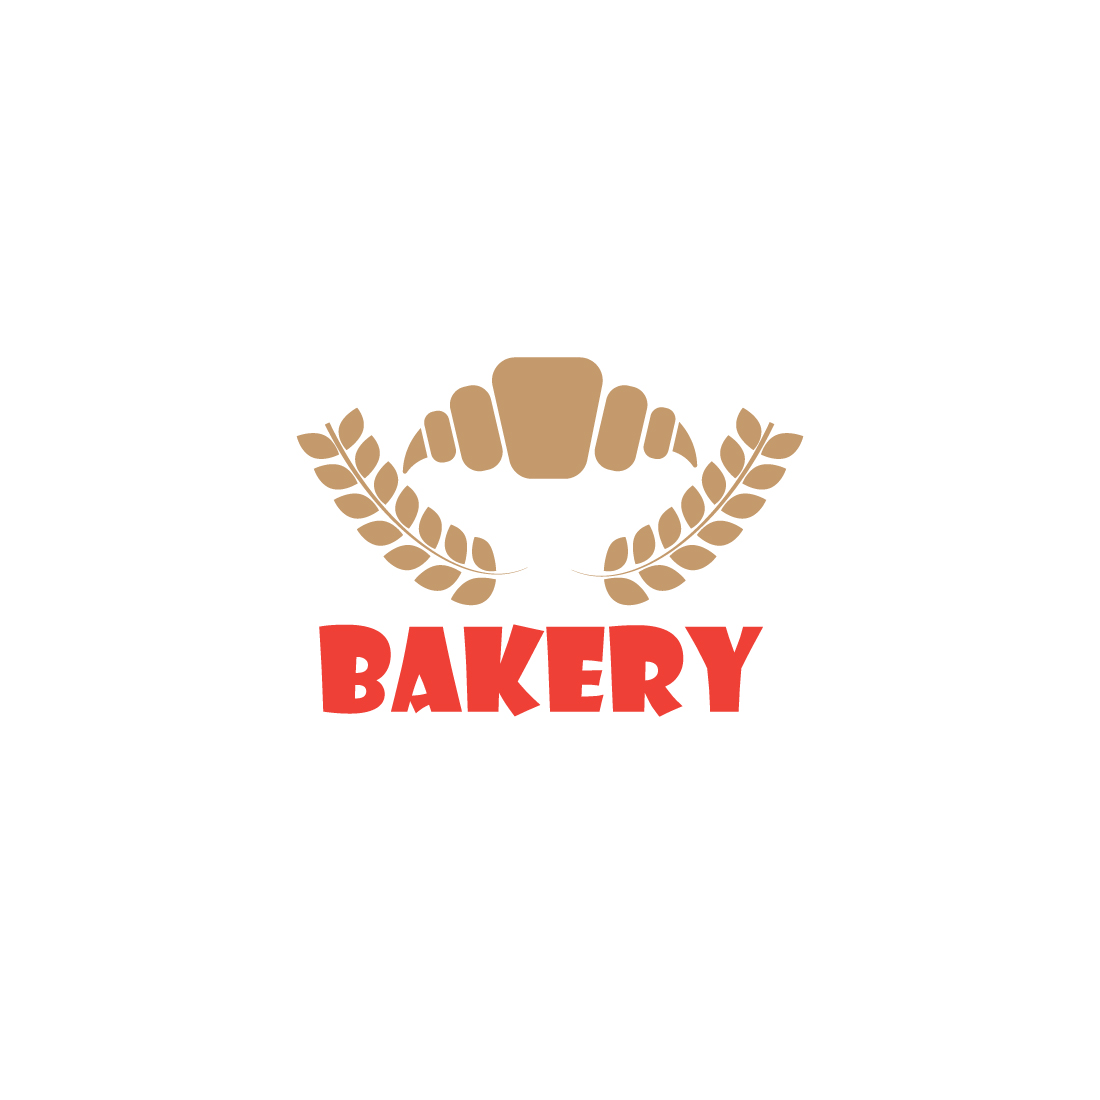 bakery brand logo preview image.